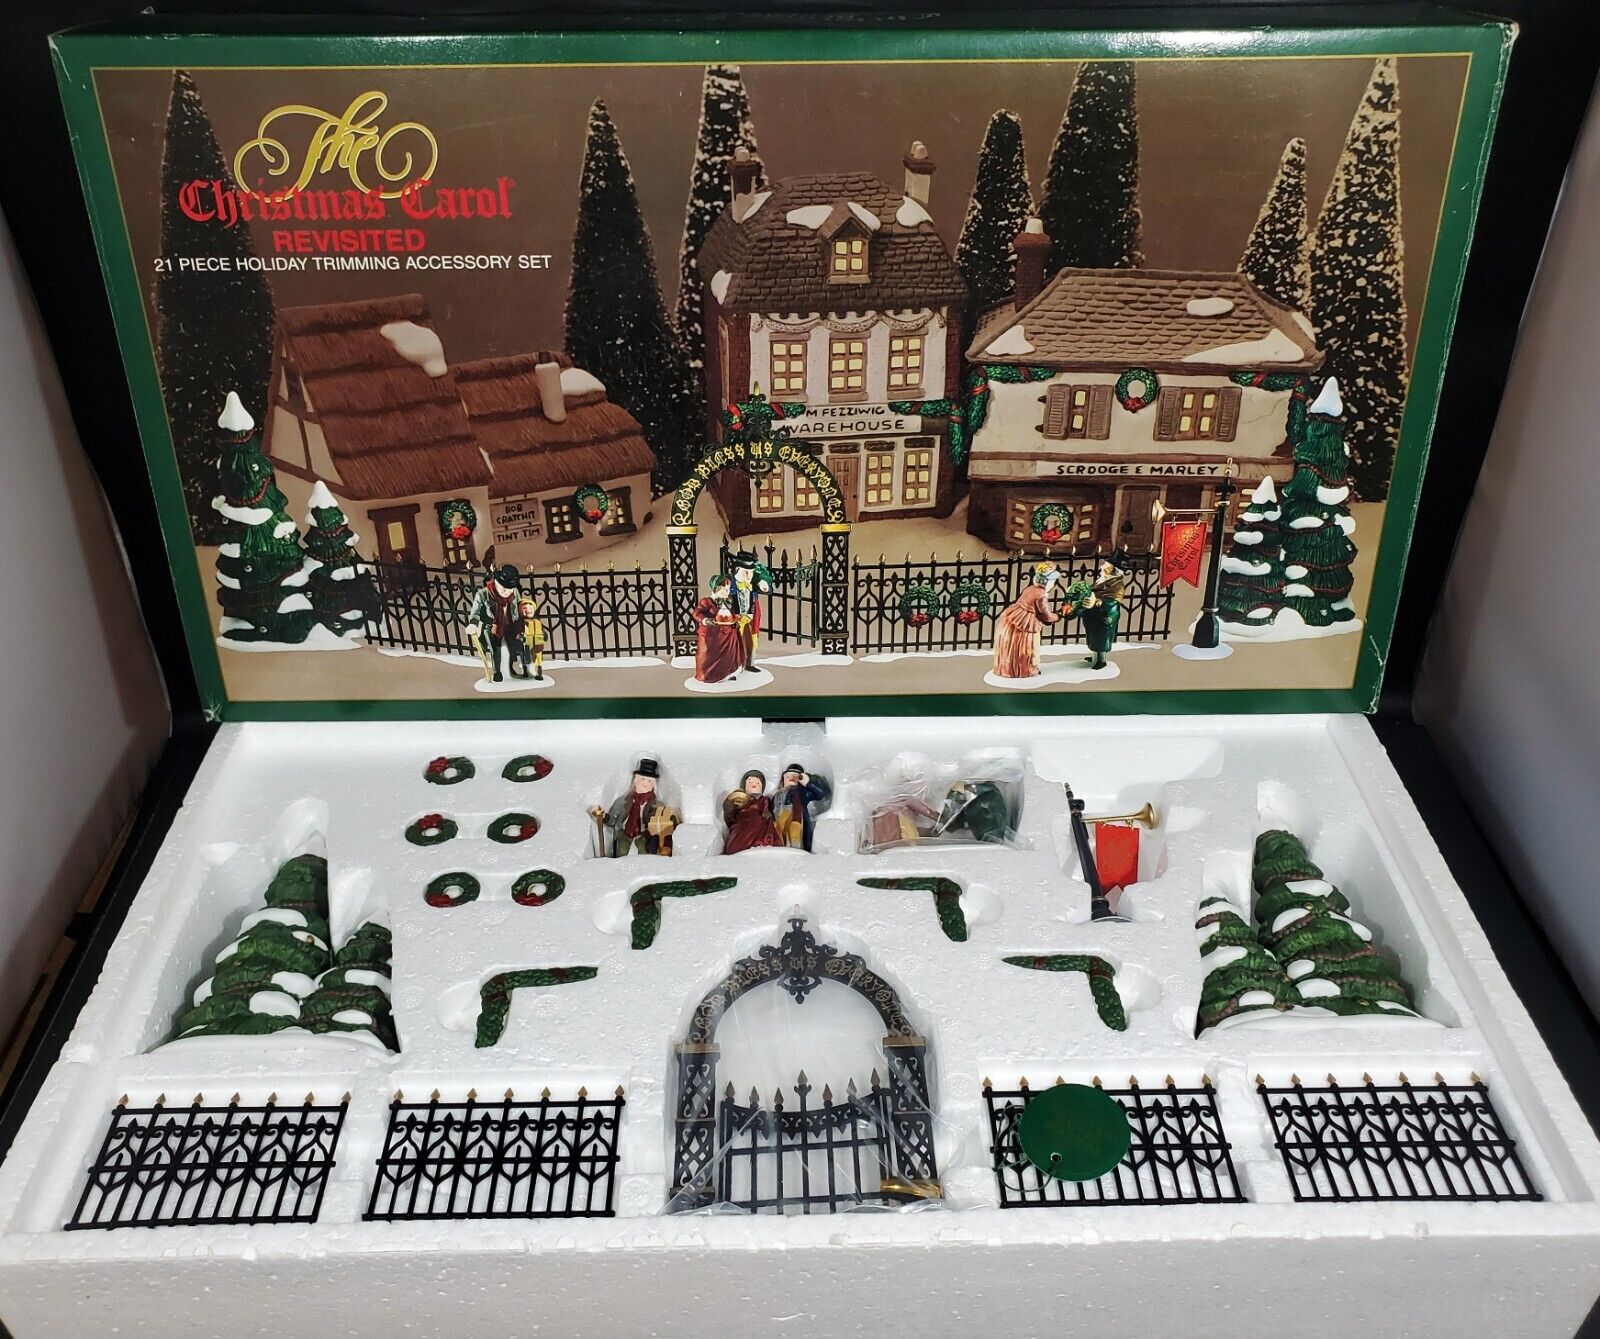 Dept 56 The Christmas Carol Revisited 21 Piece Holiday Trimming Set 58319